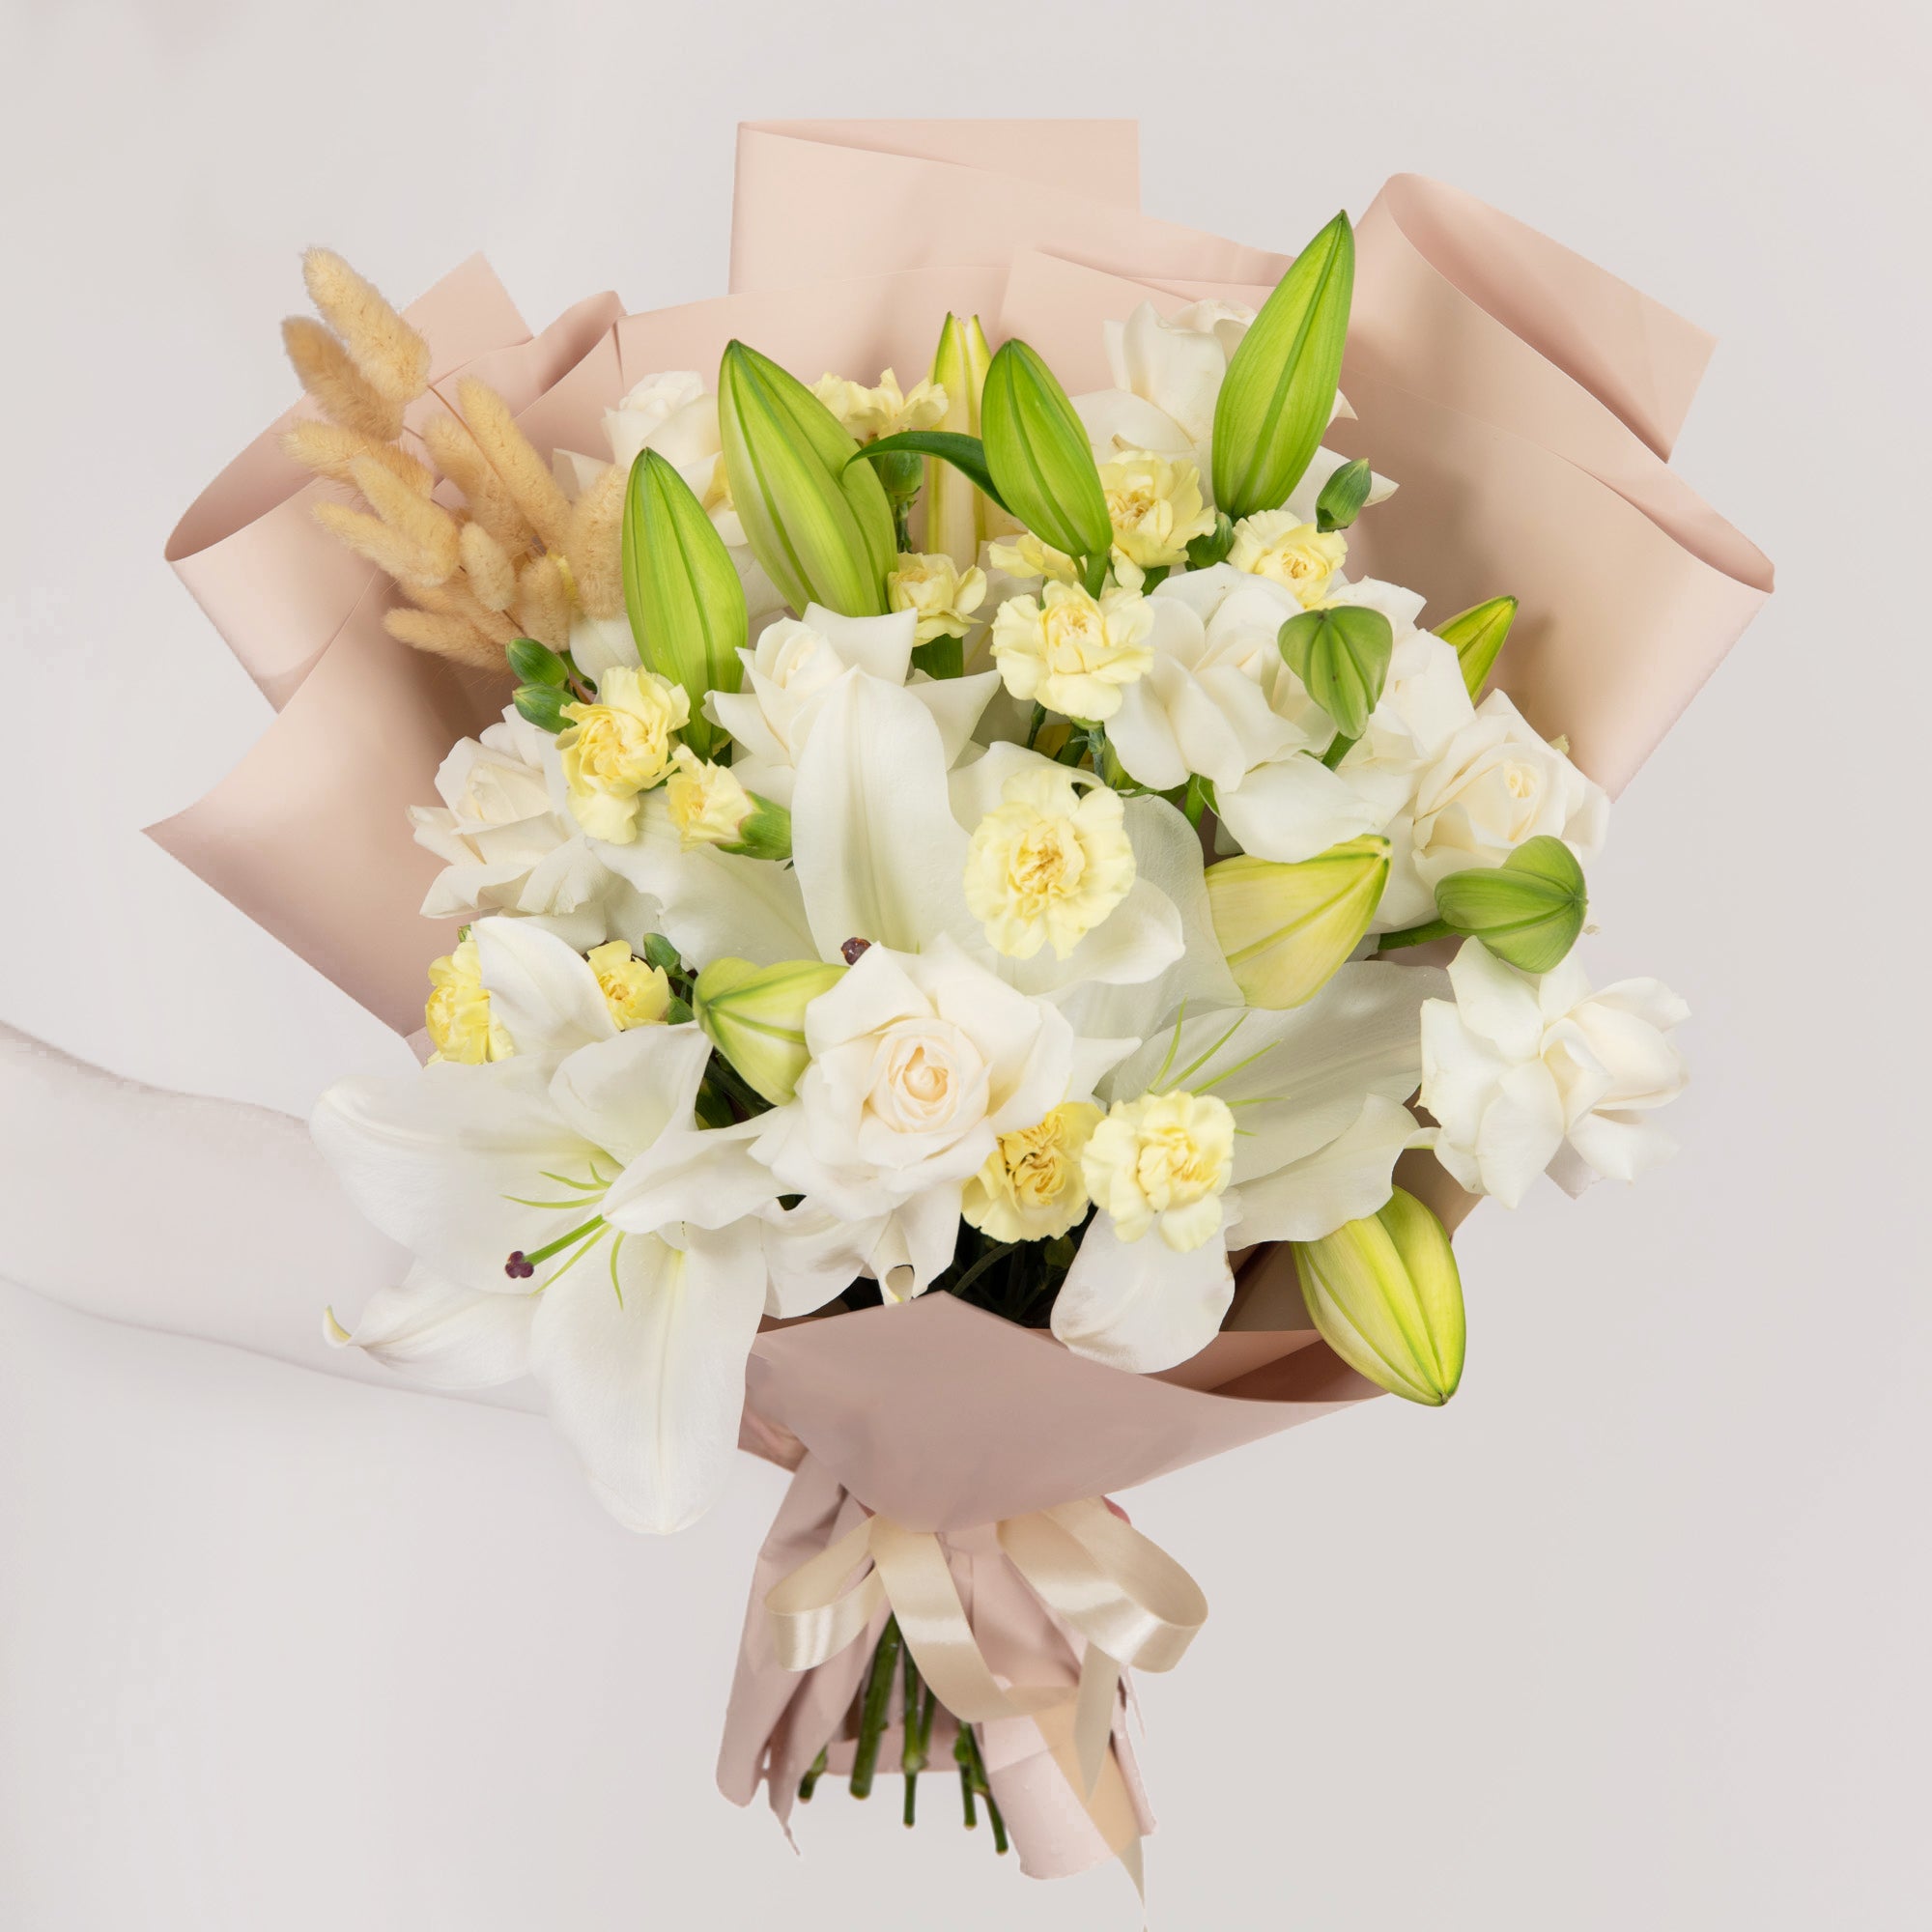 Bouquet with lilies and white roses